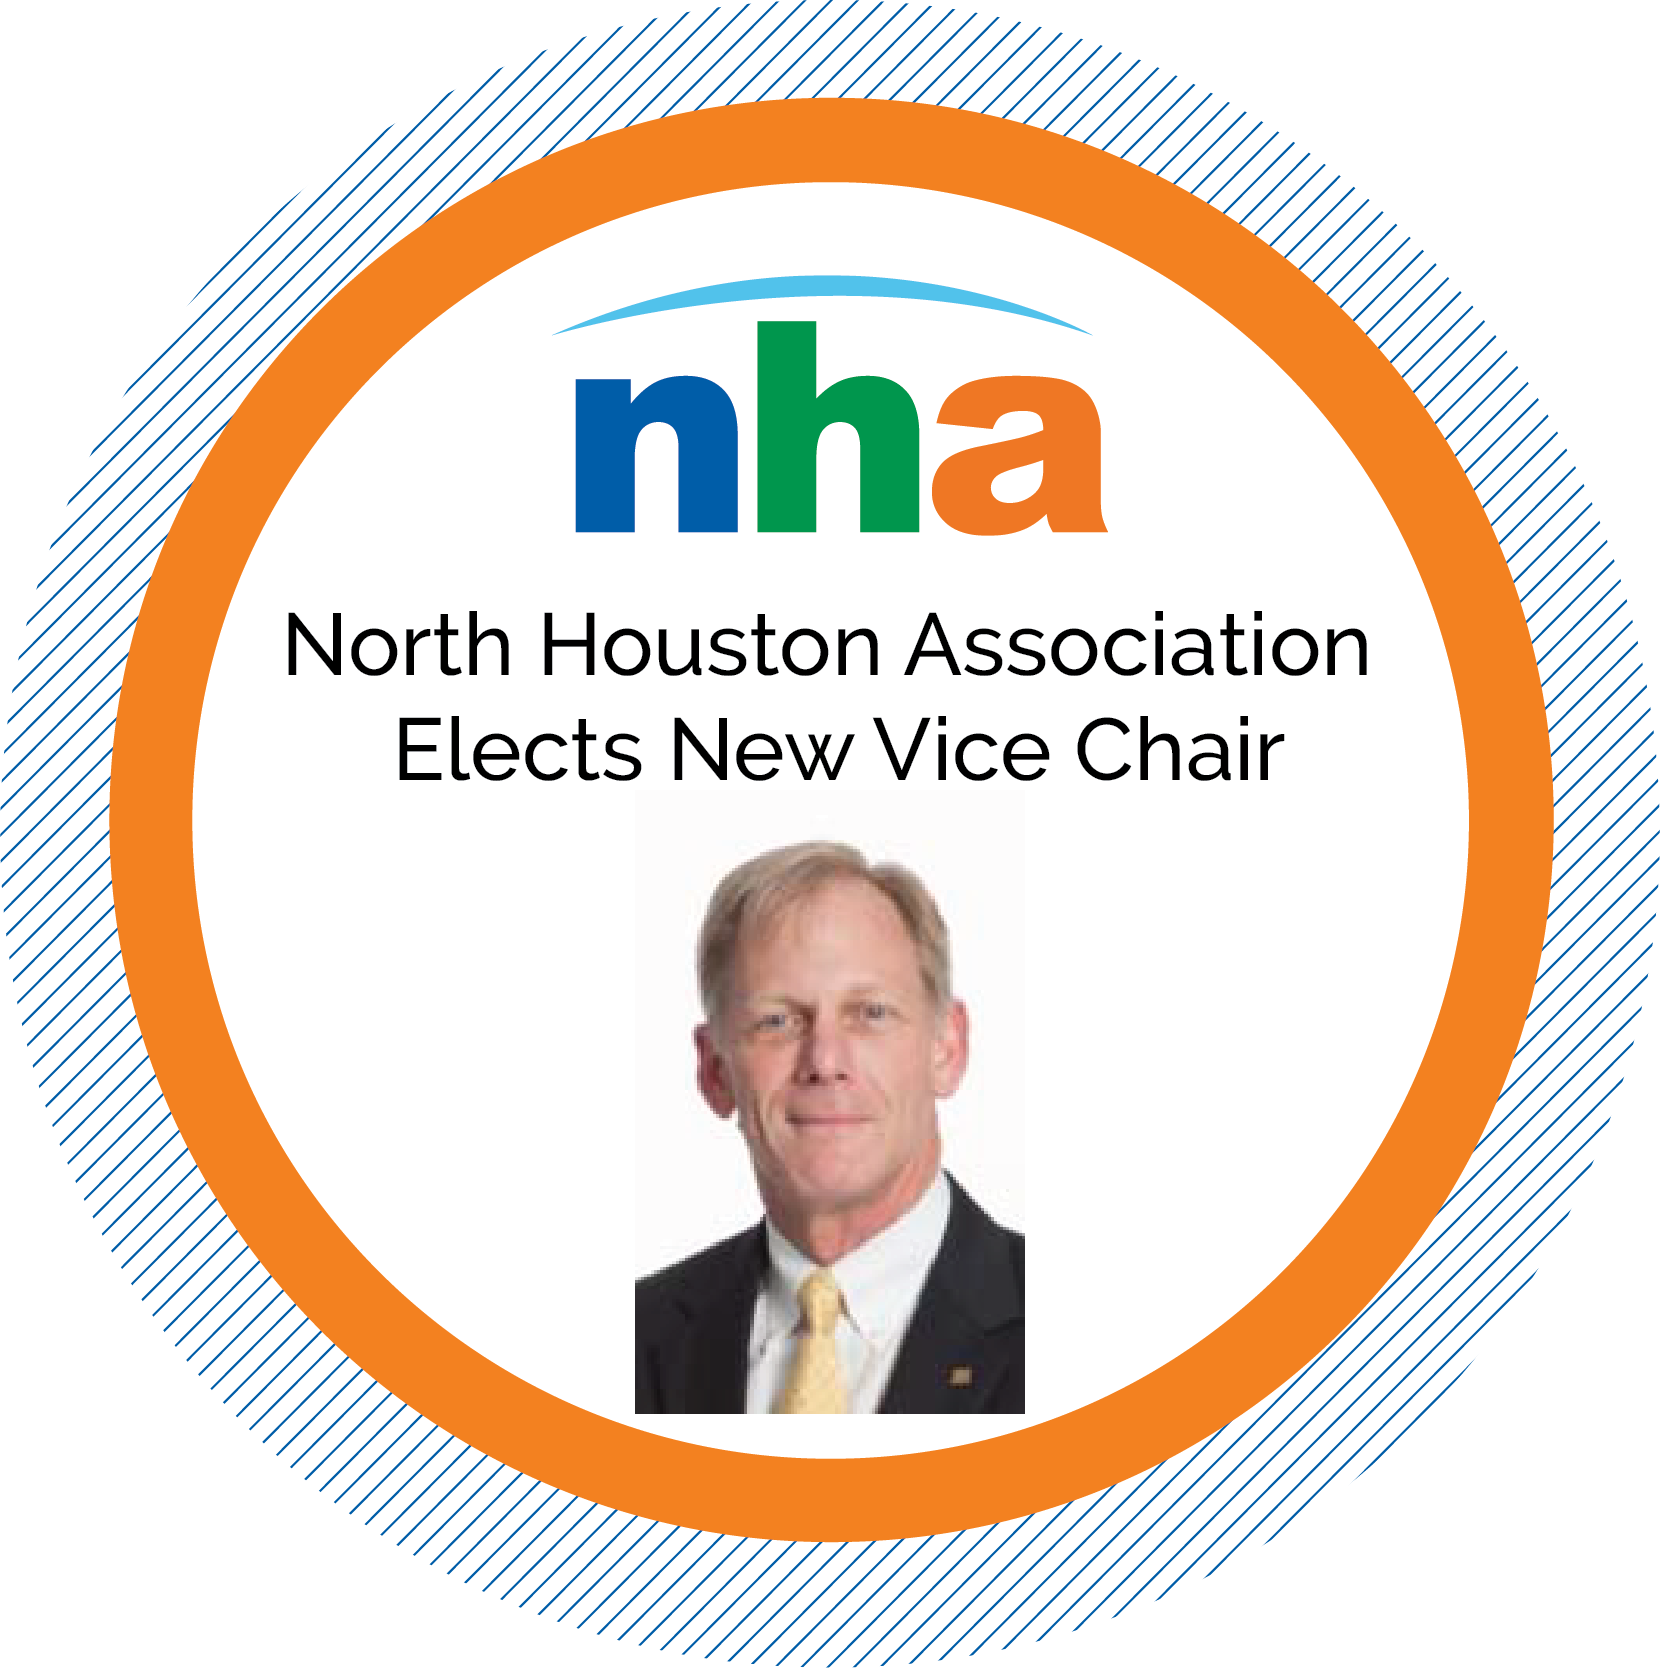 North Houston Association Elects New Vice Chair